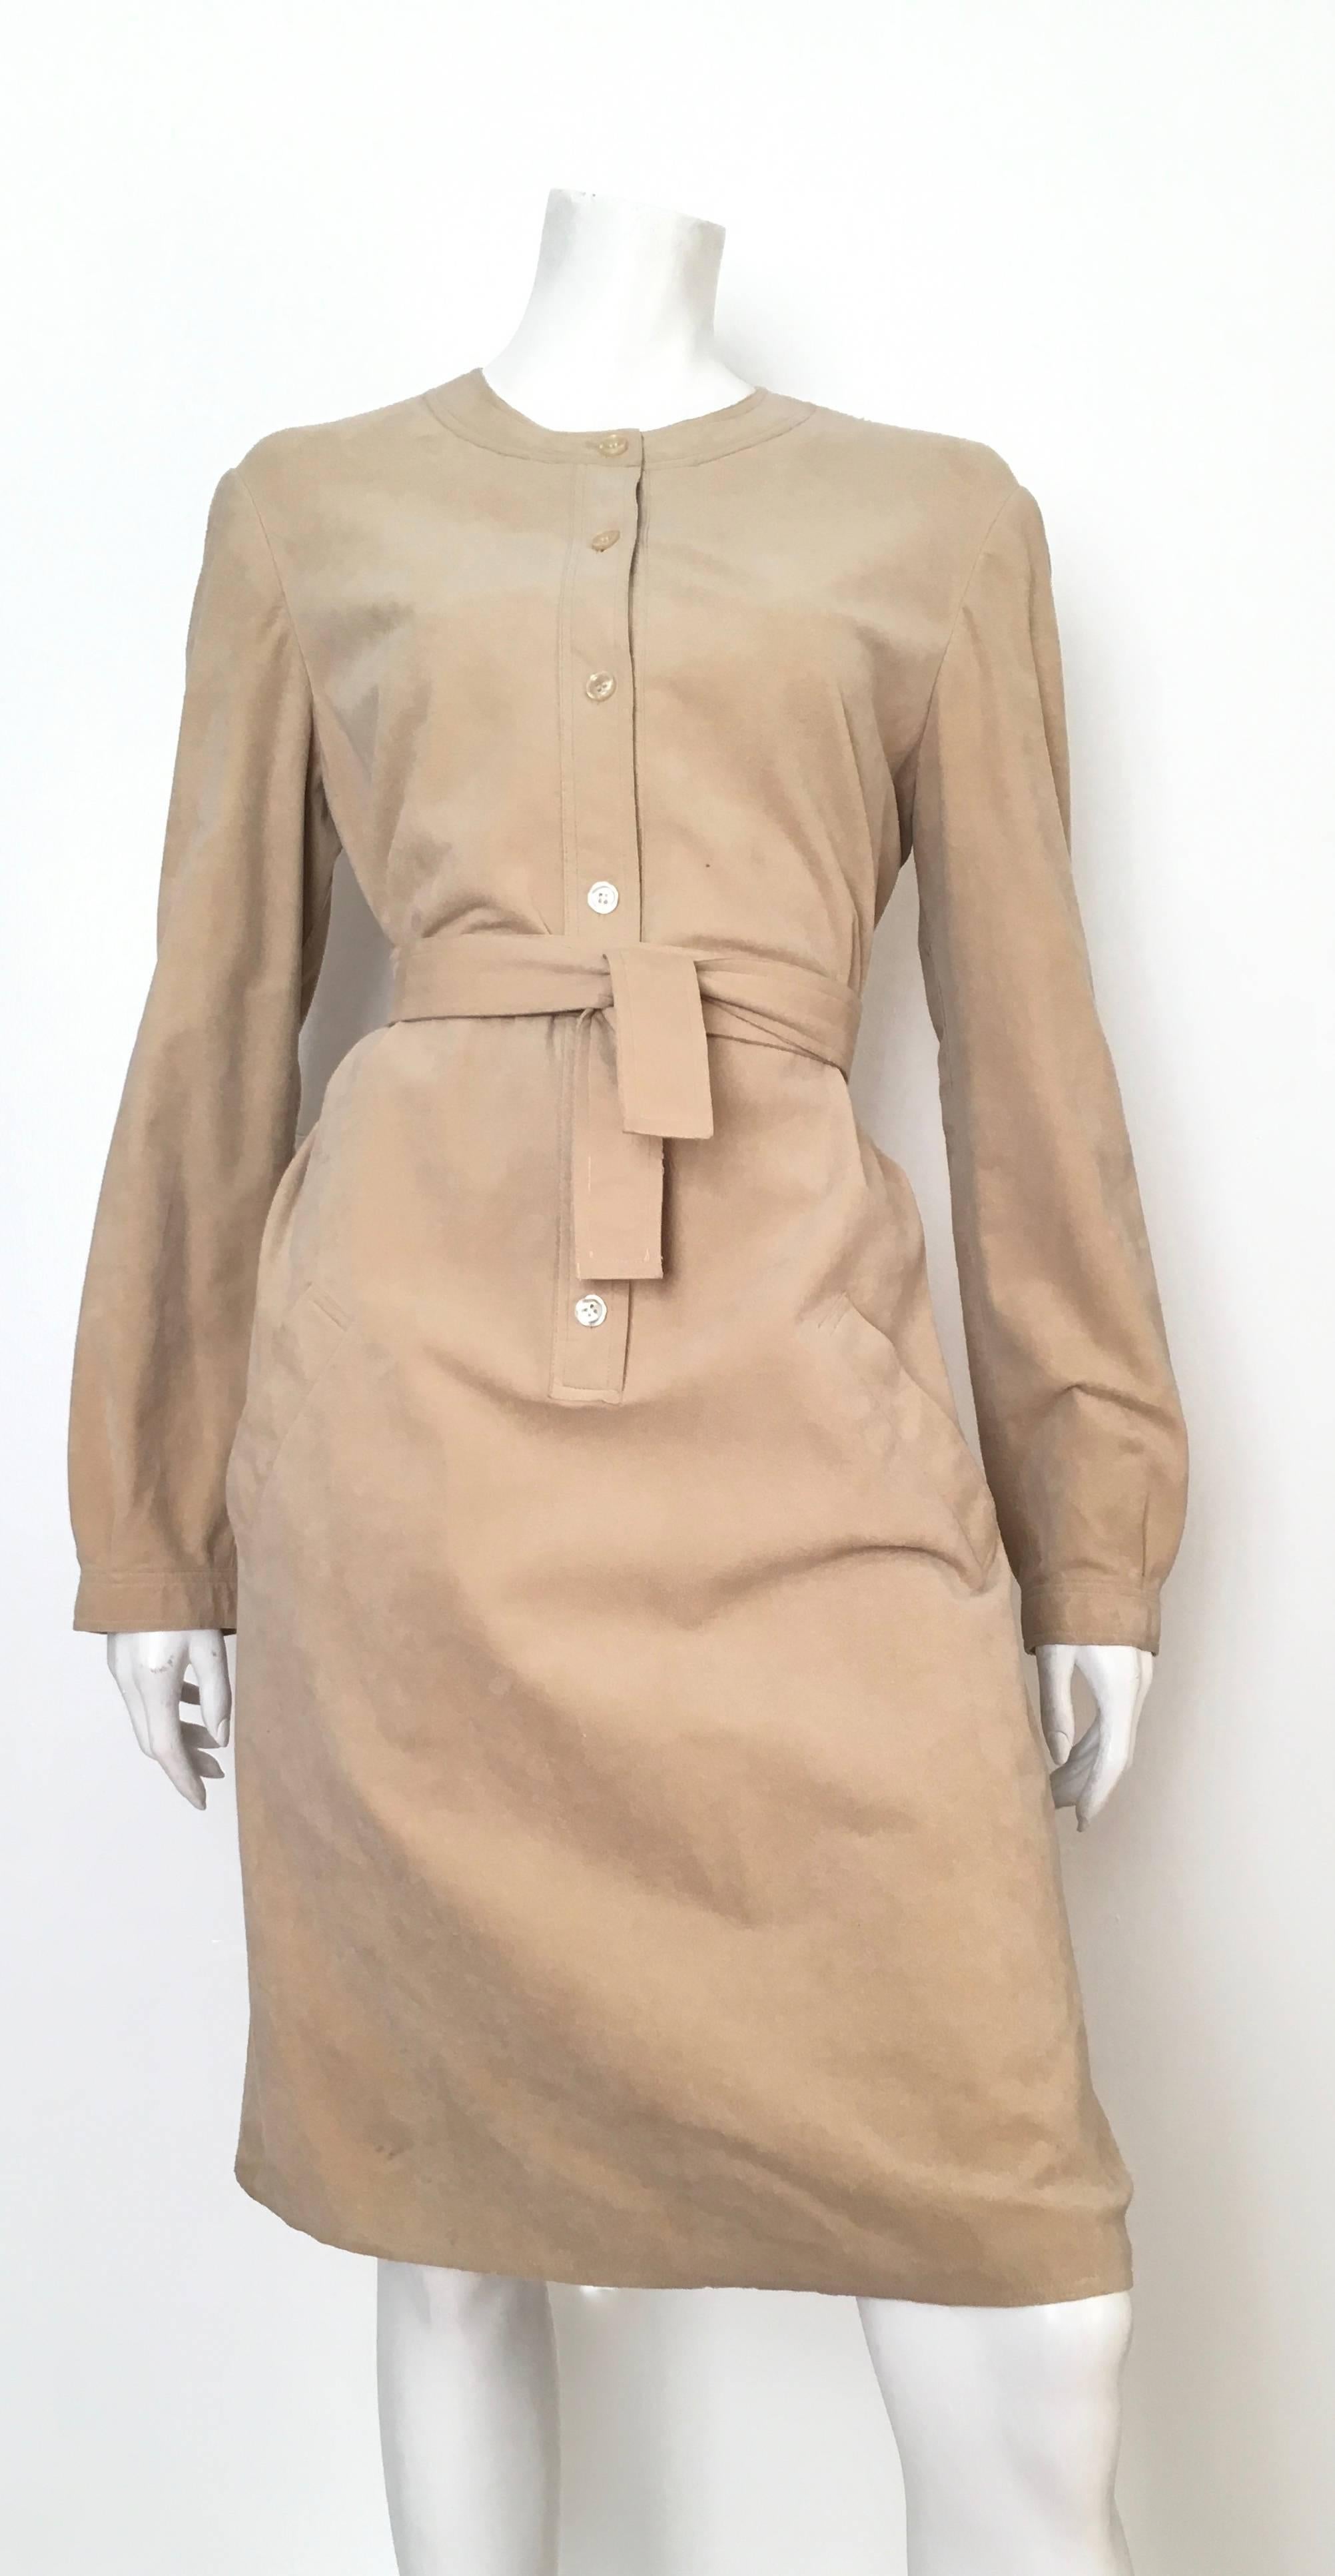 Halston 1970s tan ultrasuede belted dress is a size large.  Ladies please grab your trusted tape measure so you can properly measure your bust, waist & hips to make certain this will fit the way Halston wanted it to on your lovely body. 